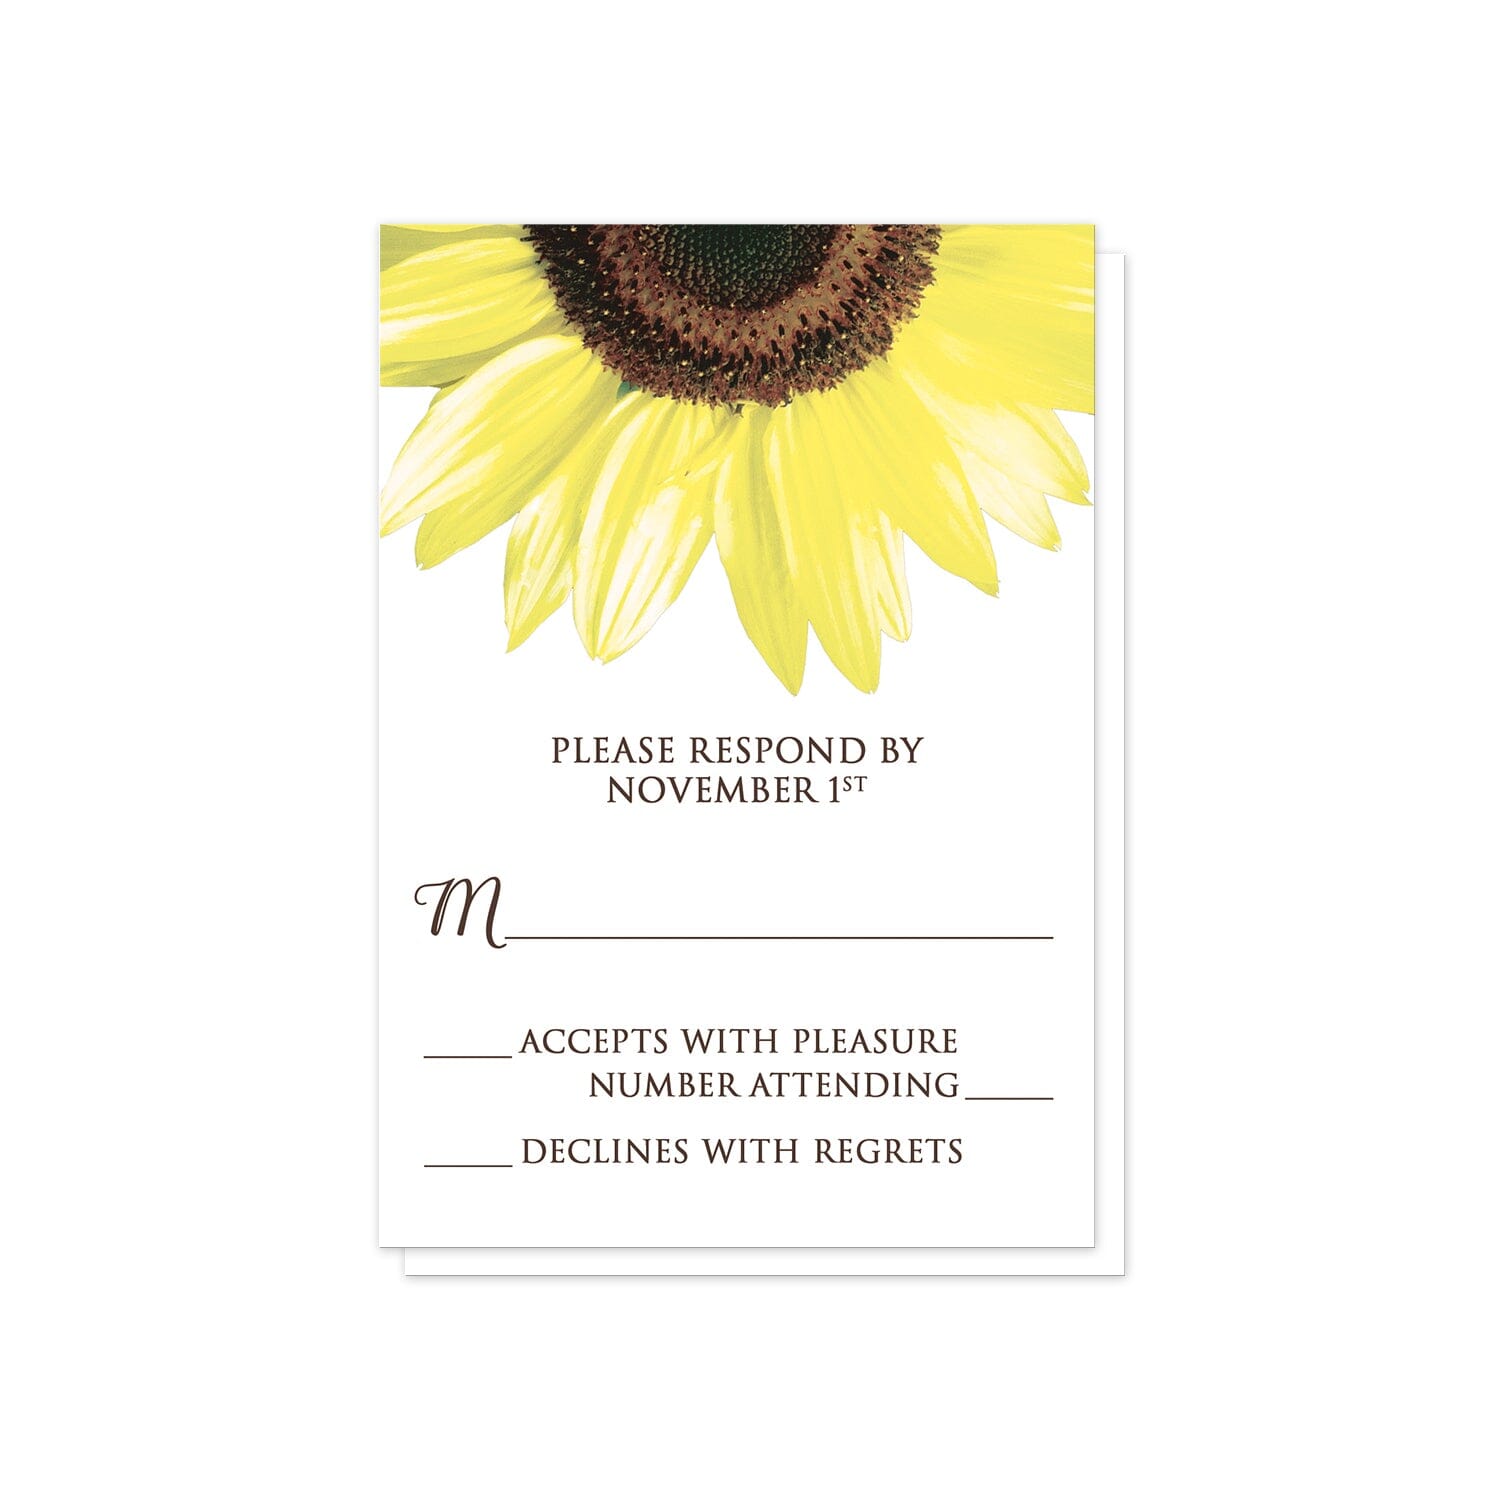 Rustic Sunflower and Wood RSVP Cards at Artistically Invited.